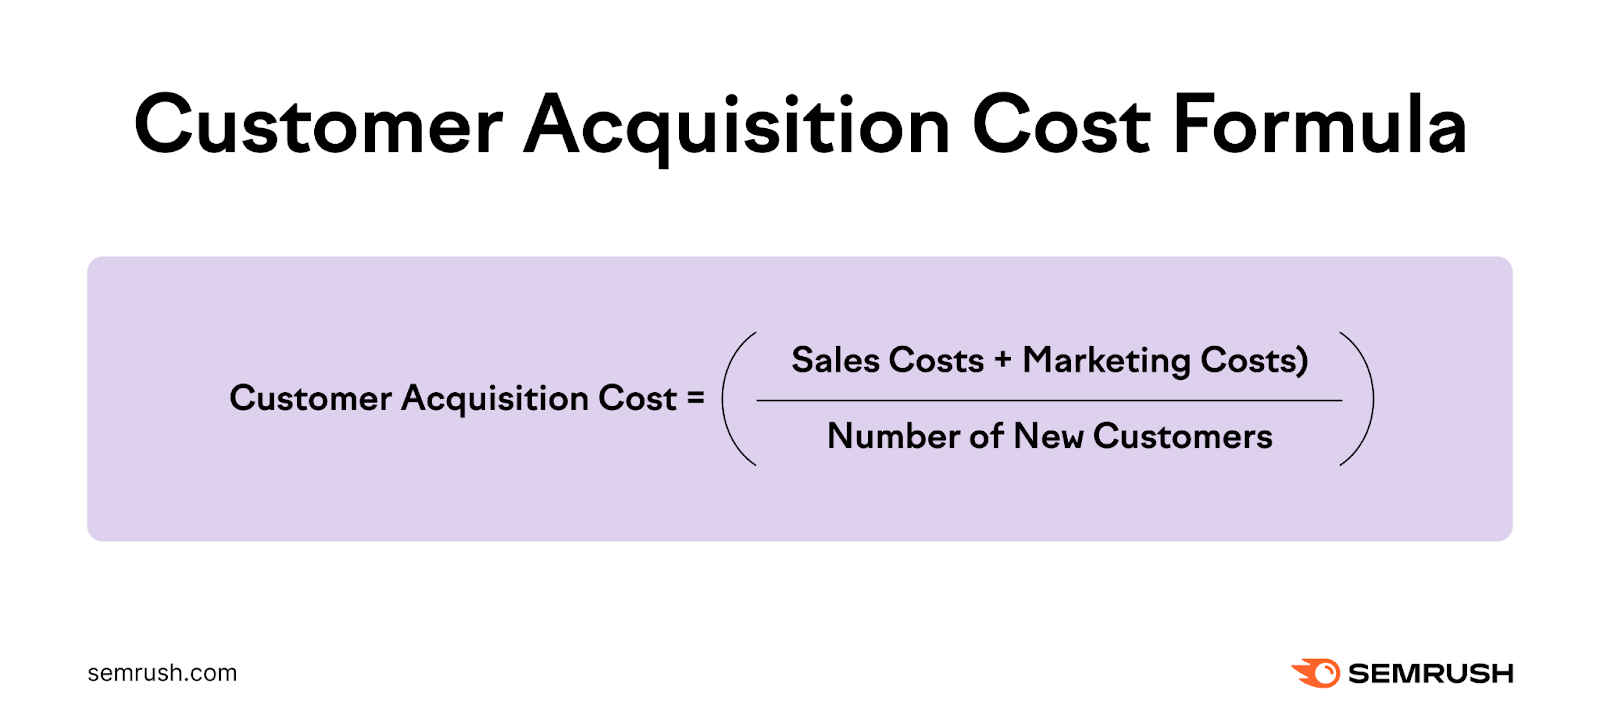 Customer acquisition cost is equal to sales costs + marketing costs divided by number of new customers.